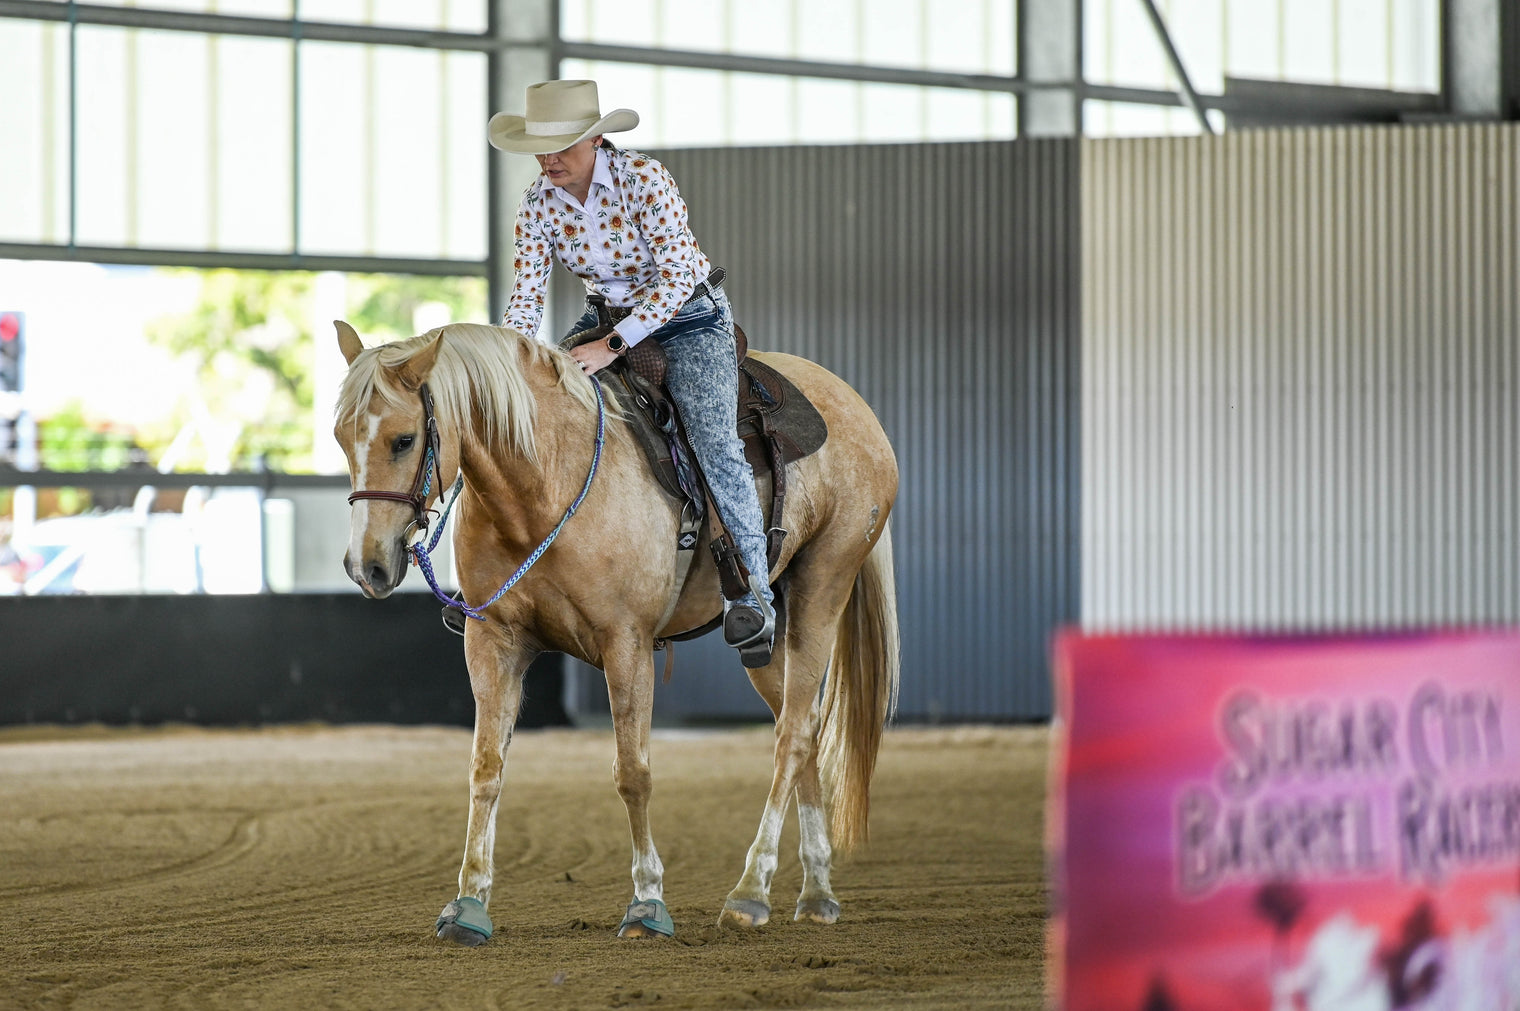 Cinch It Up! How to Choose the Perfect Cinch Size for Your Barrel Racing Horse